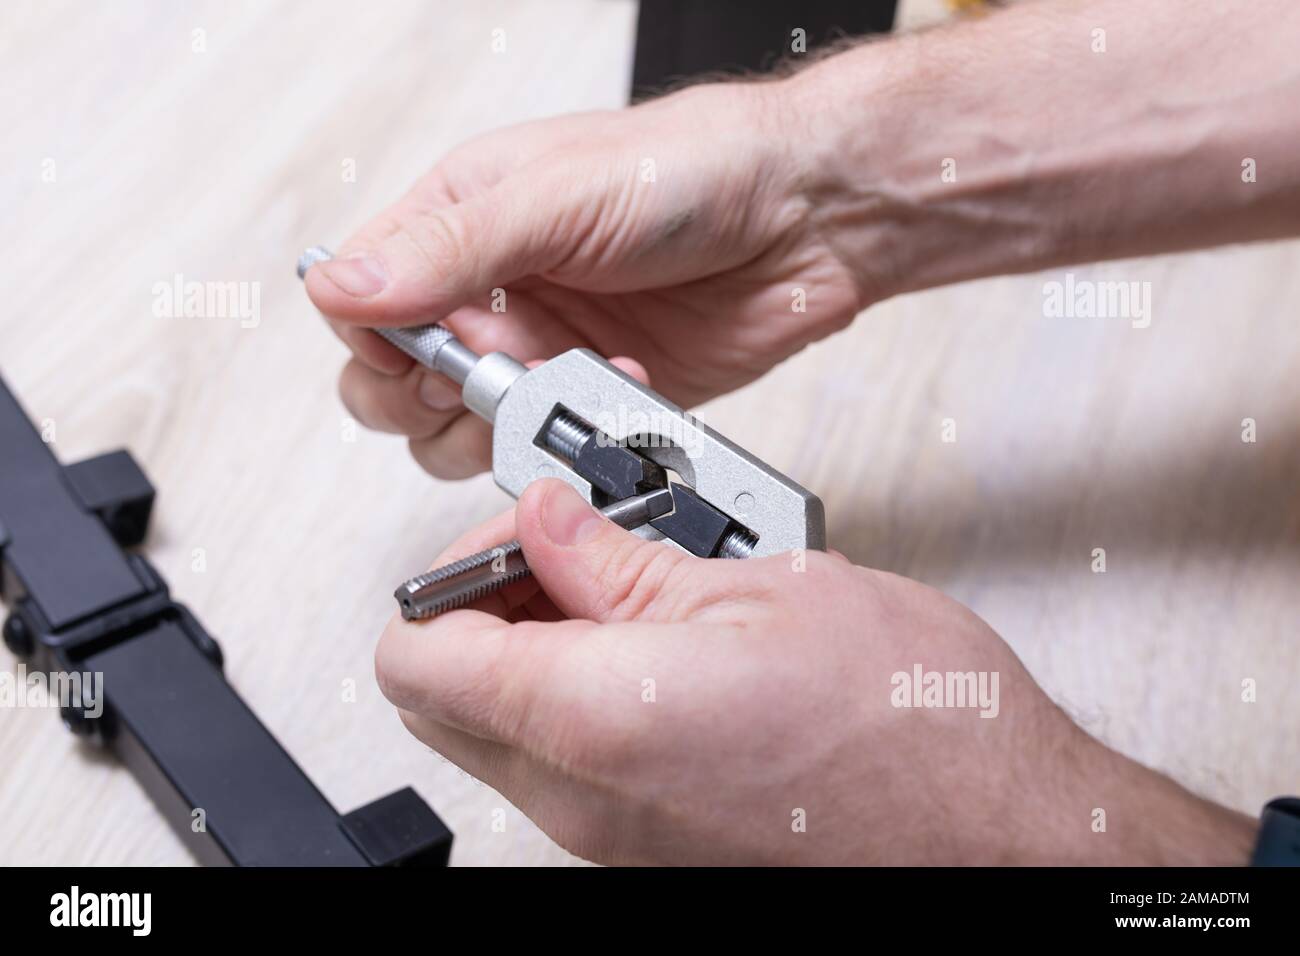 Man use mechanical hand tool, device for making threads in a screw. Stock Photo